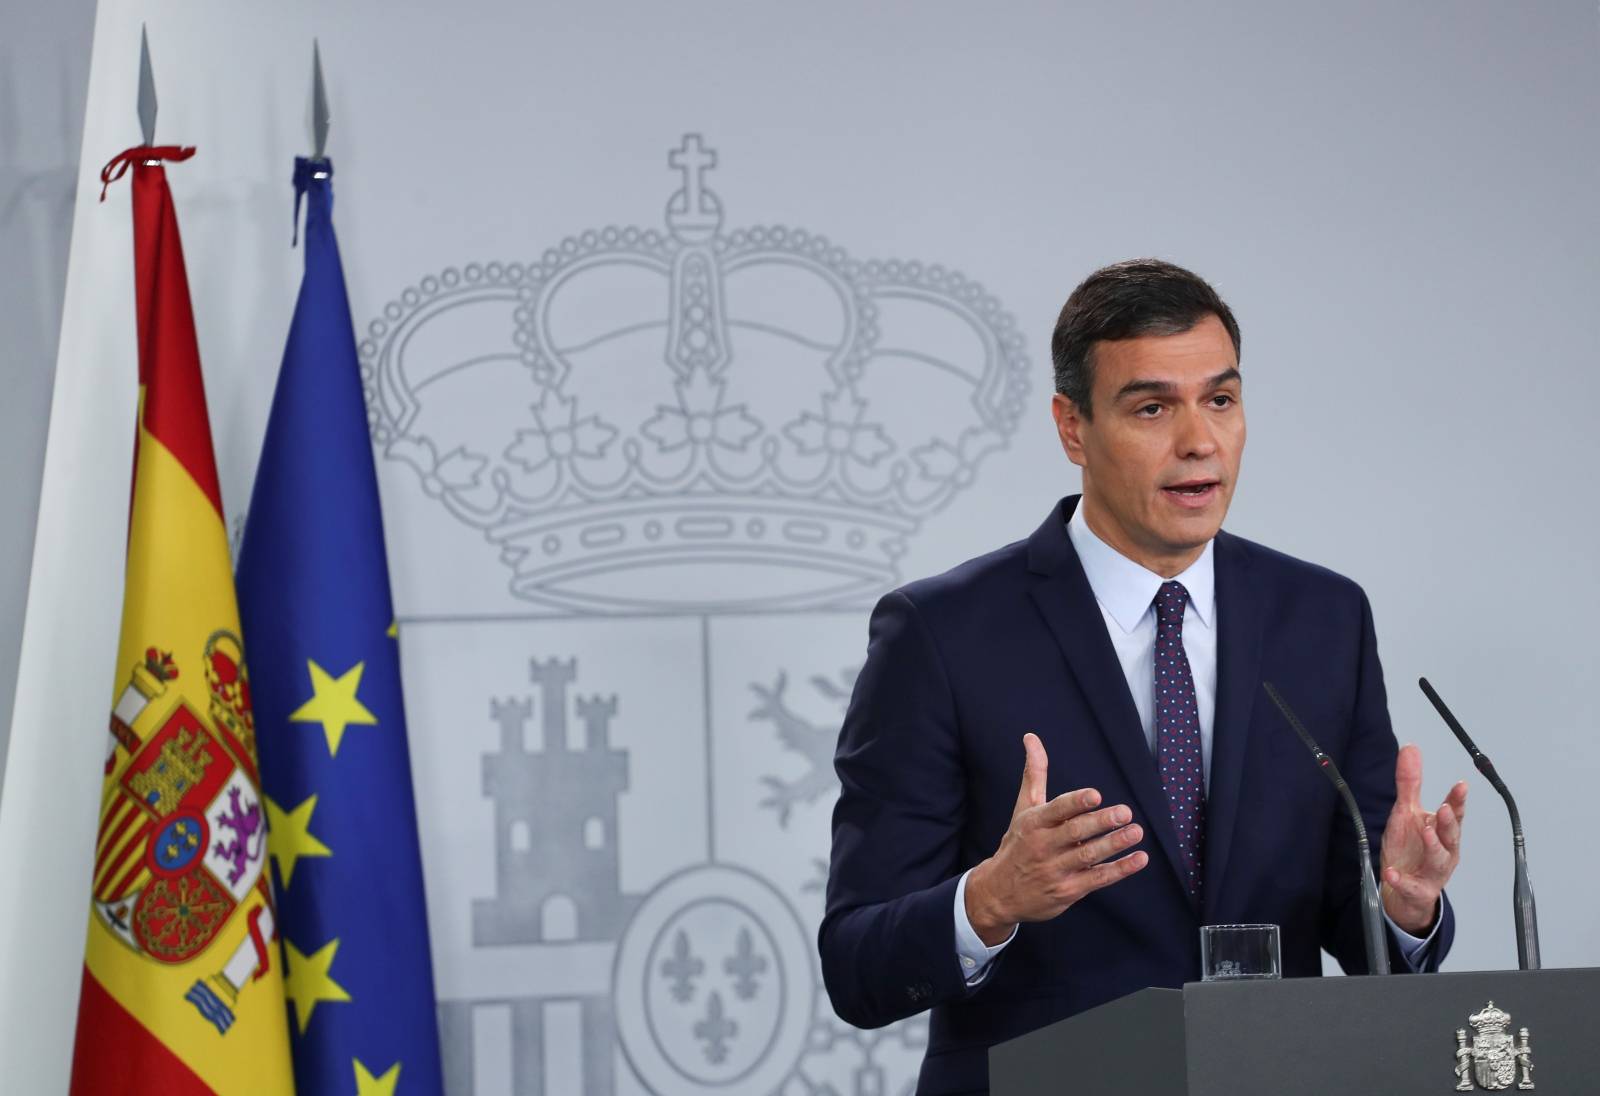 Spain's acting Prime Minister Pedro Sanchez delivers a statement after Spain's Supreme Court announcement on the verdict in the high stakes trial of Catalan separatist leaders over a banned independence referendum at Moncloa Palace in Madrid